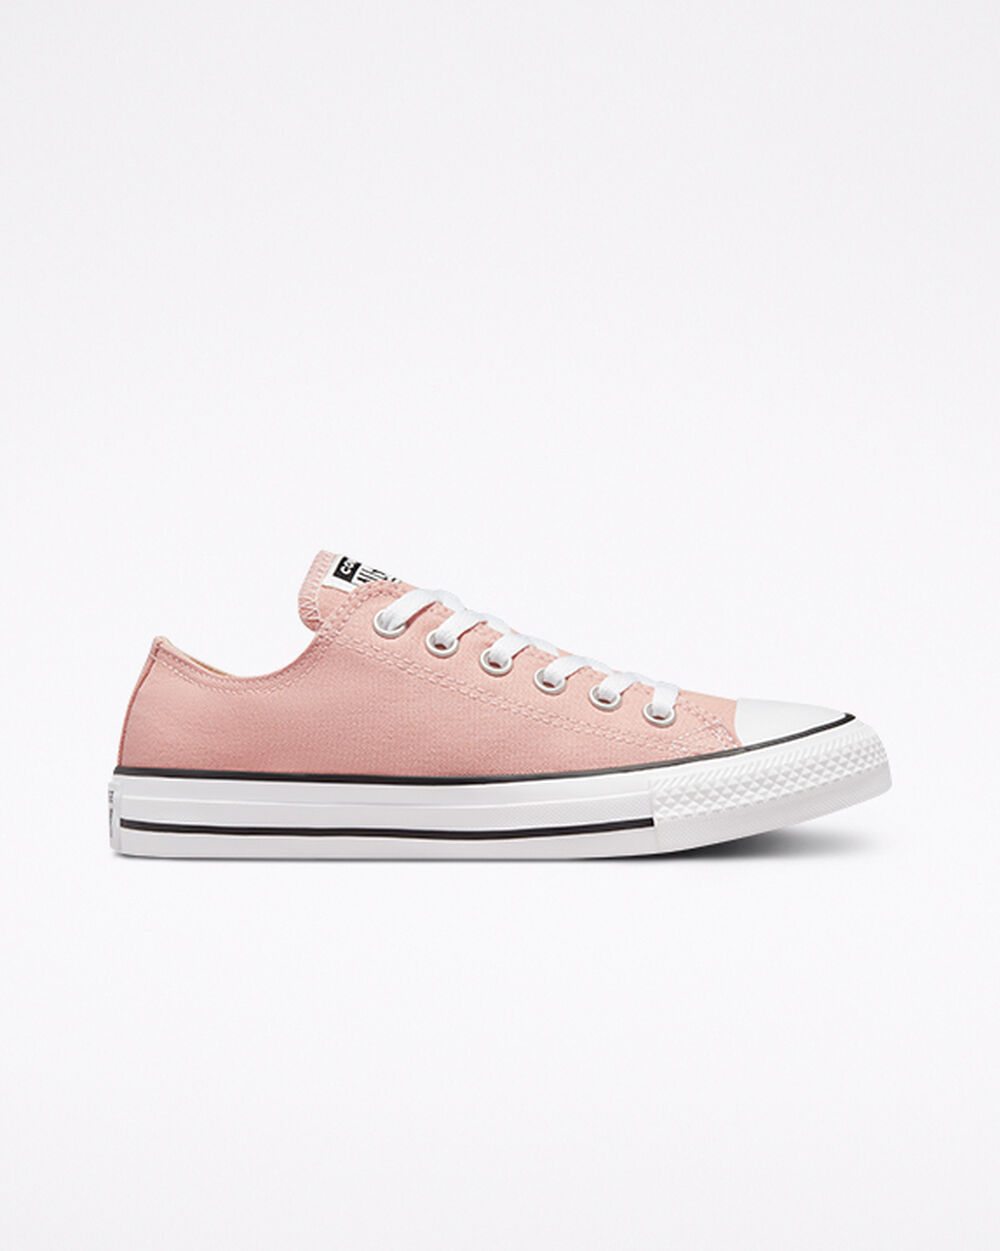 Tenis Converse Chuck Taylor All Star Mujer Rosas | Mexico-566416